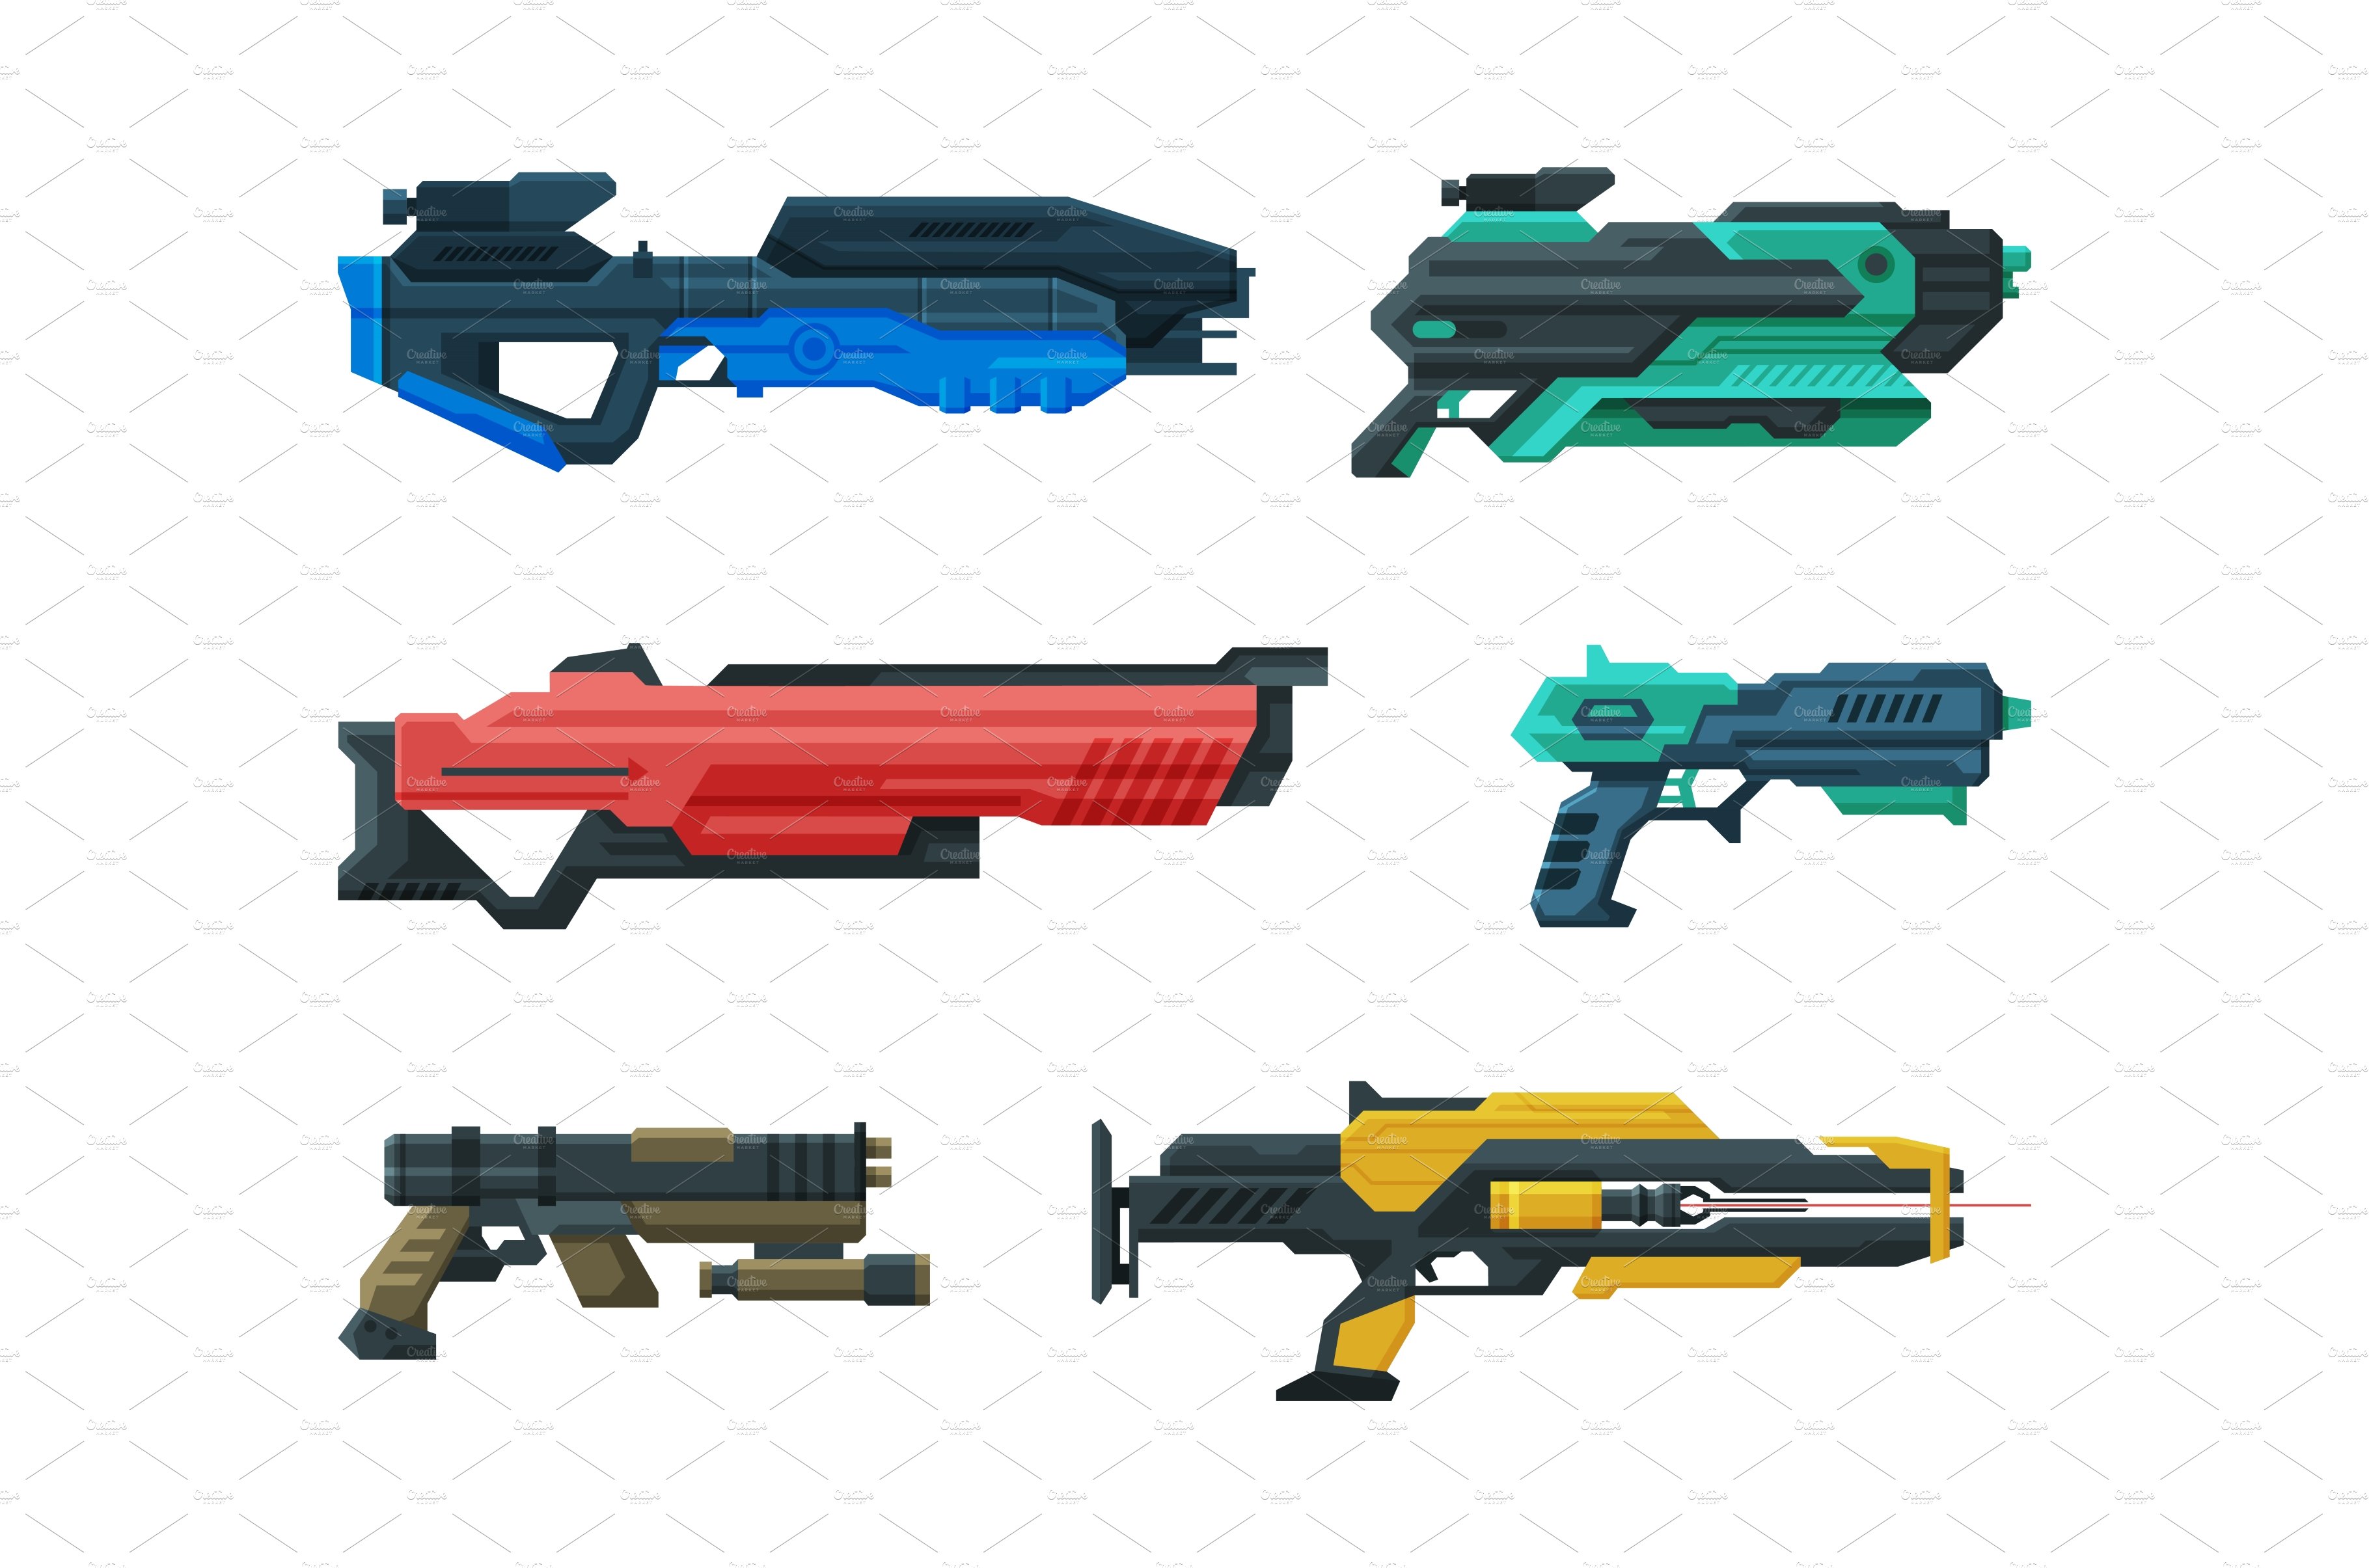 Futuristic Weapons, Blaster and Gun cover image.